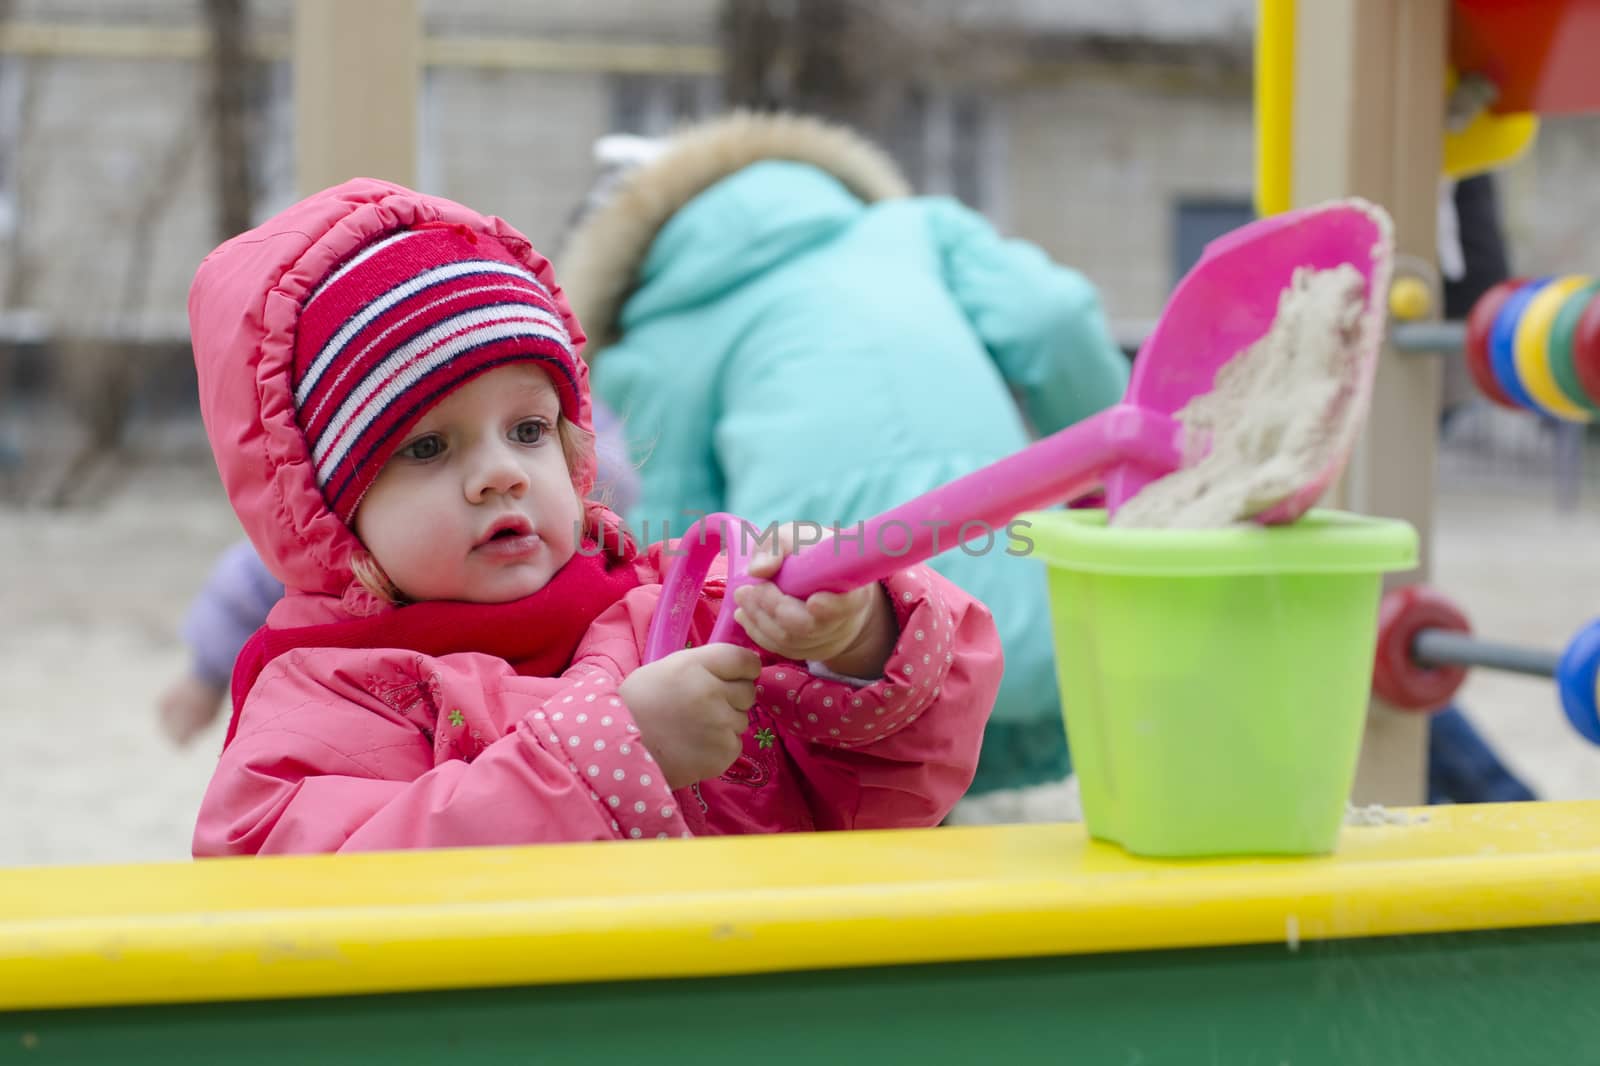 The little girl pours sand in the bucket, while in the sandbox. In early spring. Girl dressed in warm clothes